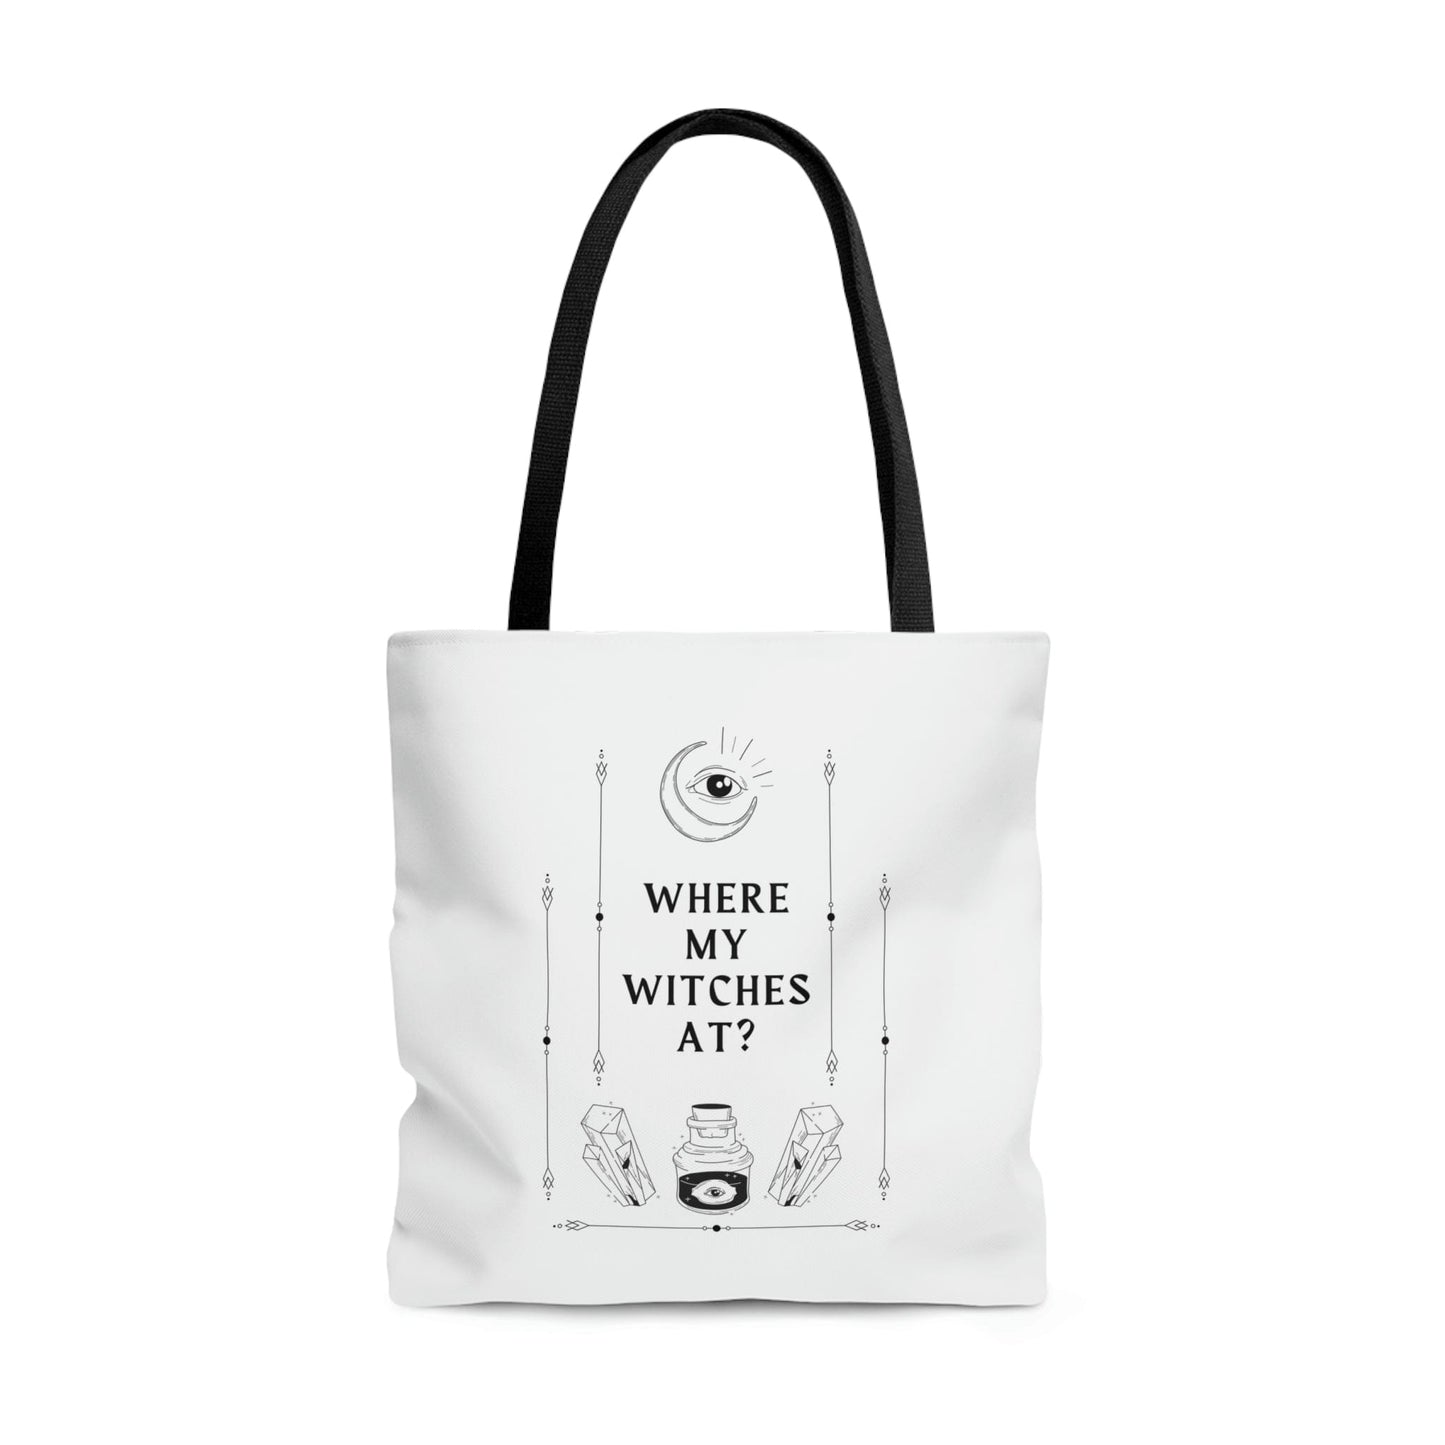 “Where my witches at?” Tote Bag